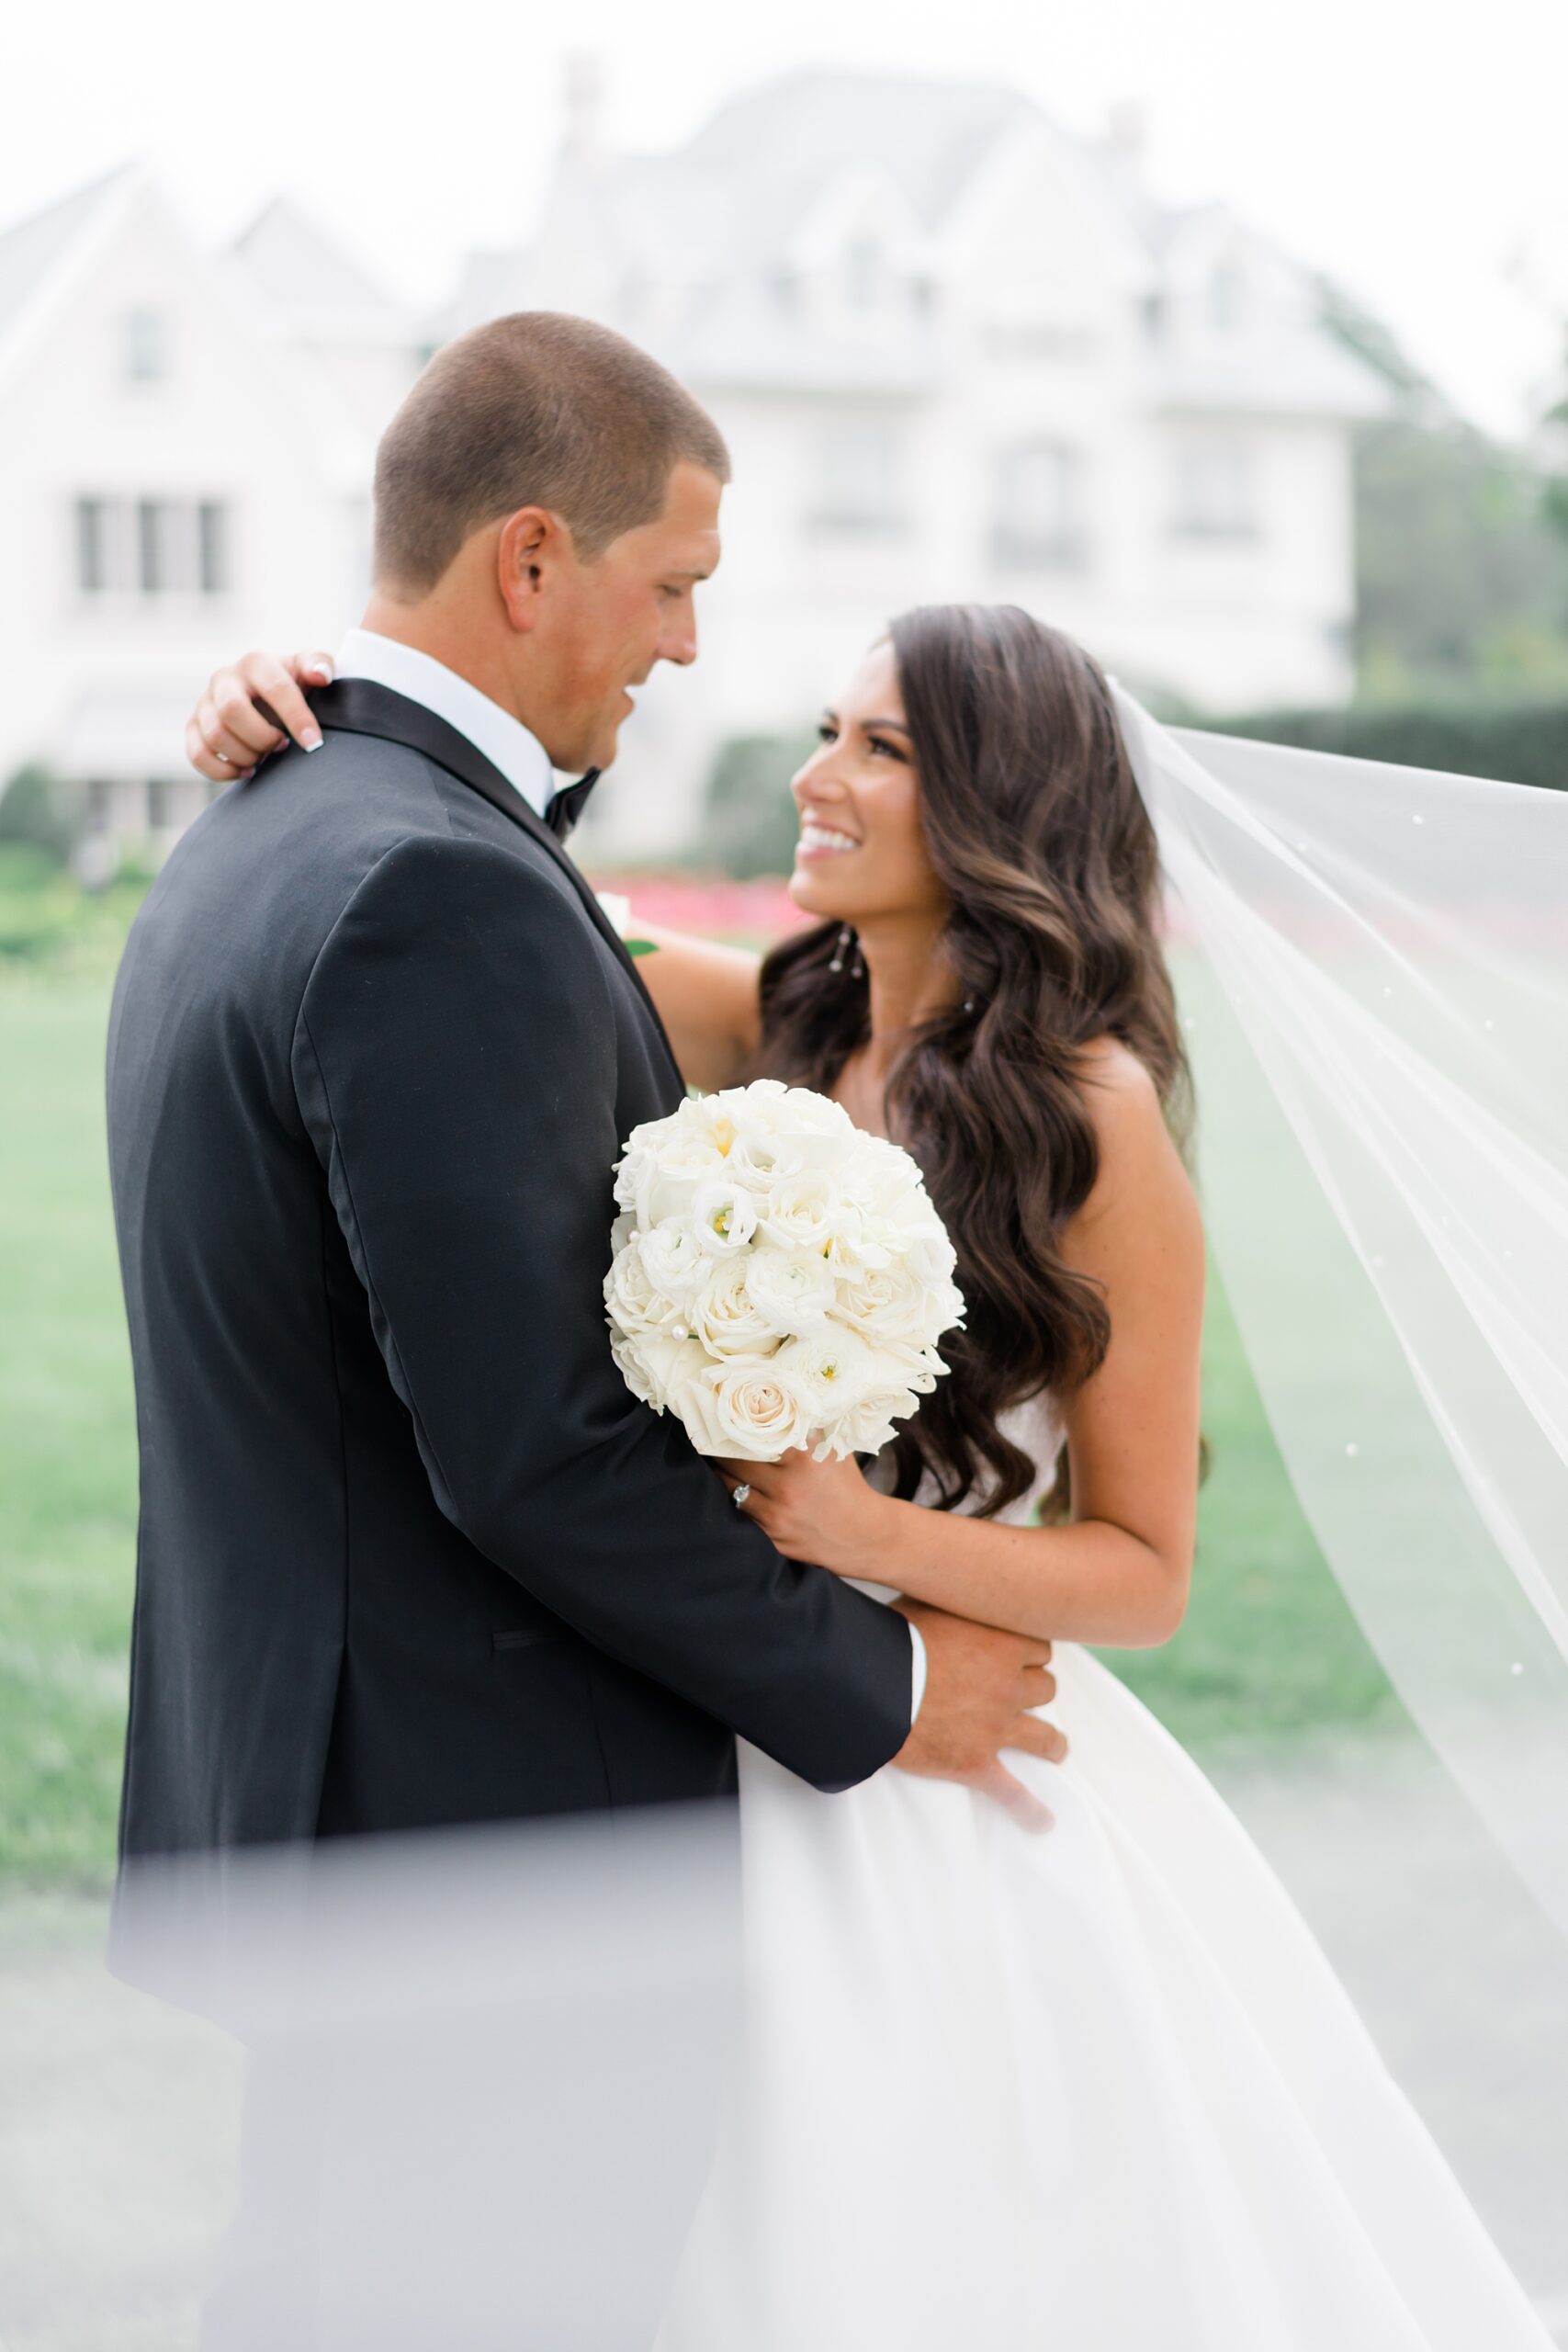 romantic wedding portraits from Elegant New Jersey Wedding at Park Chateau